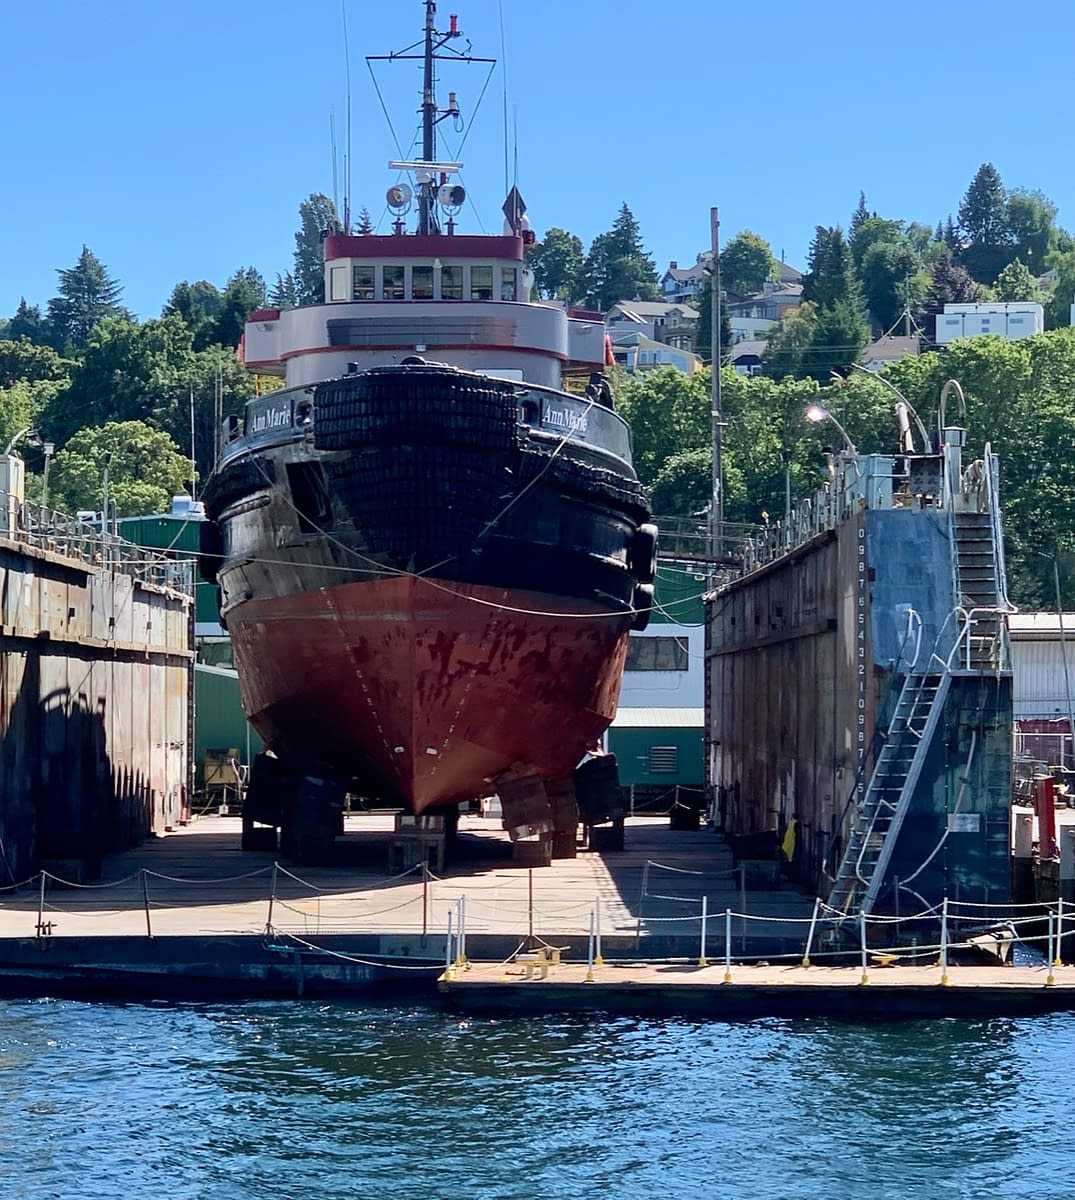 A boat in dry dock as seen while touring the Ballard Locks